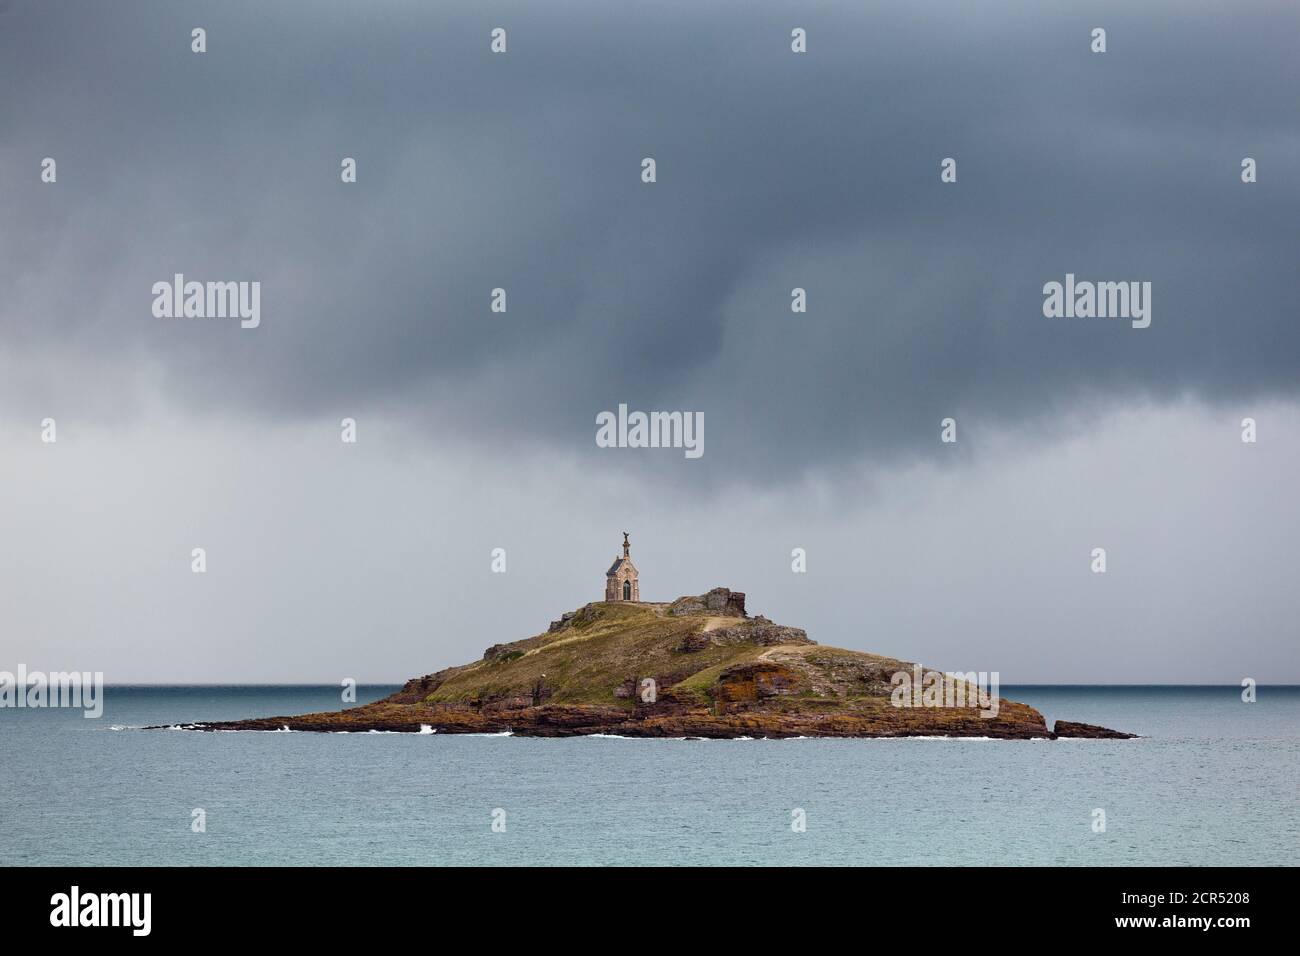 The tidal island of Ilot St. Michel at high tide during a summer thunderstorm Stock Photo